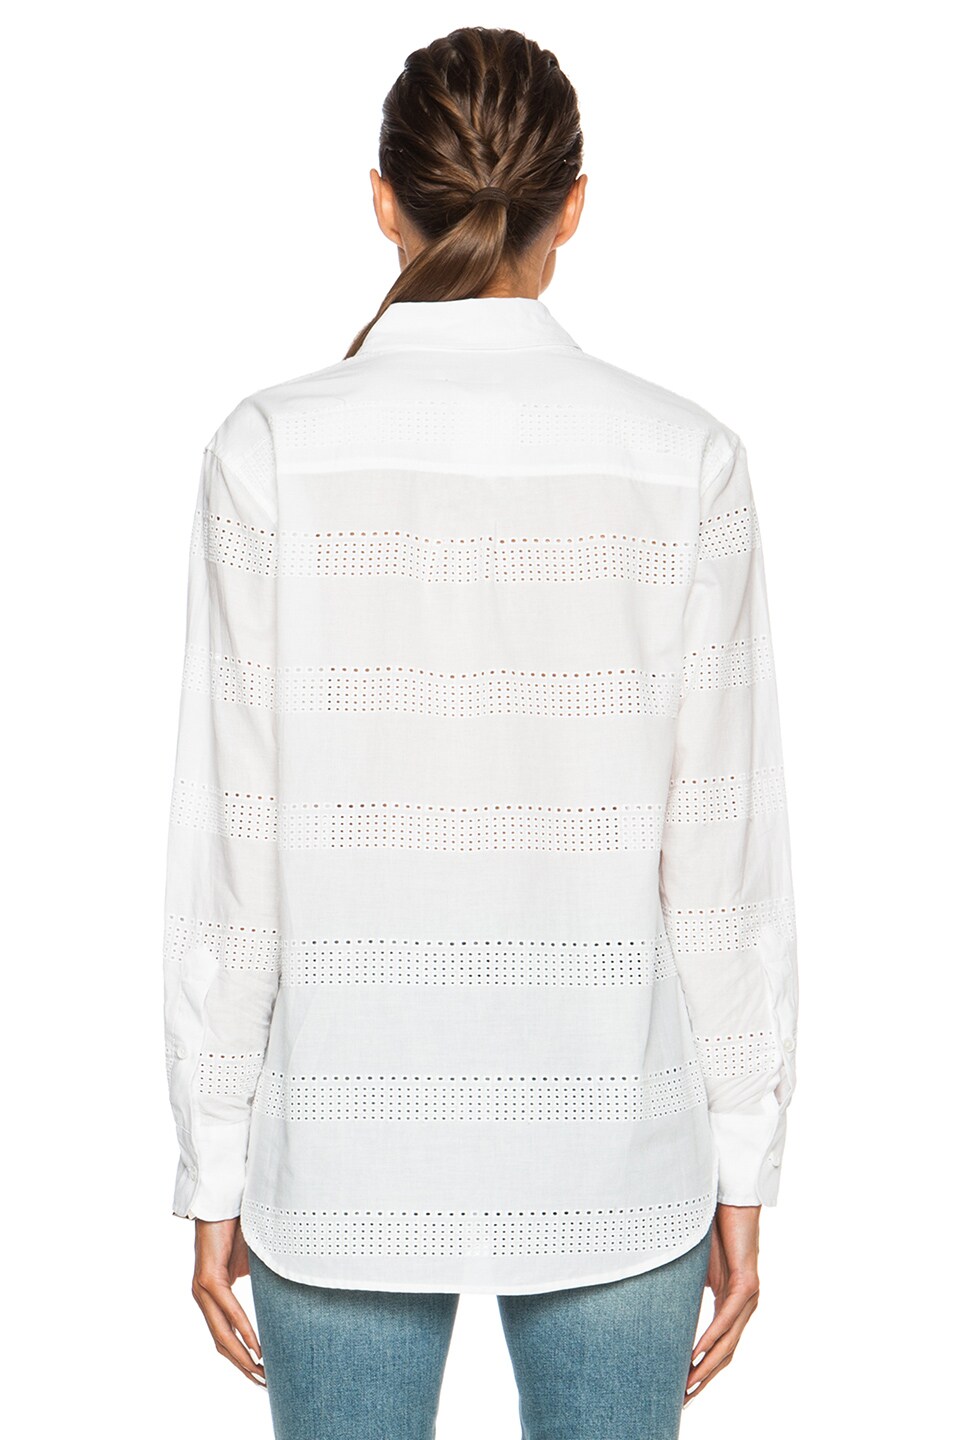 Equipment Margaux Clean with Contrast Cotton Top in Bright White | FWRD